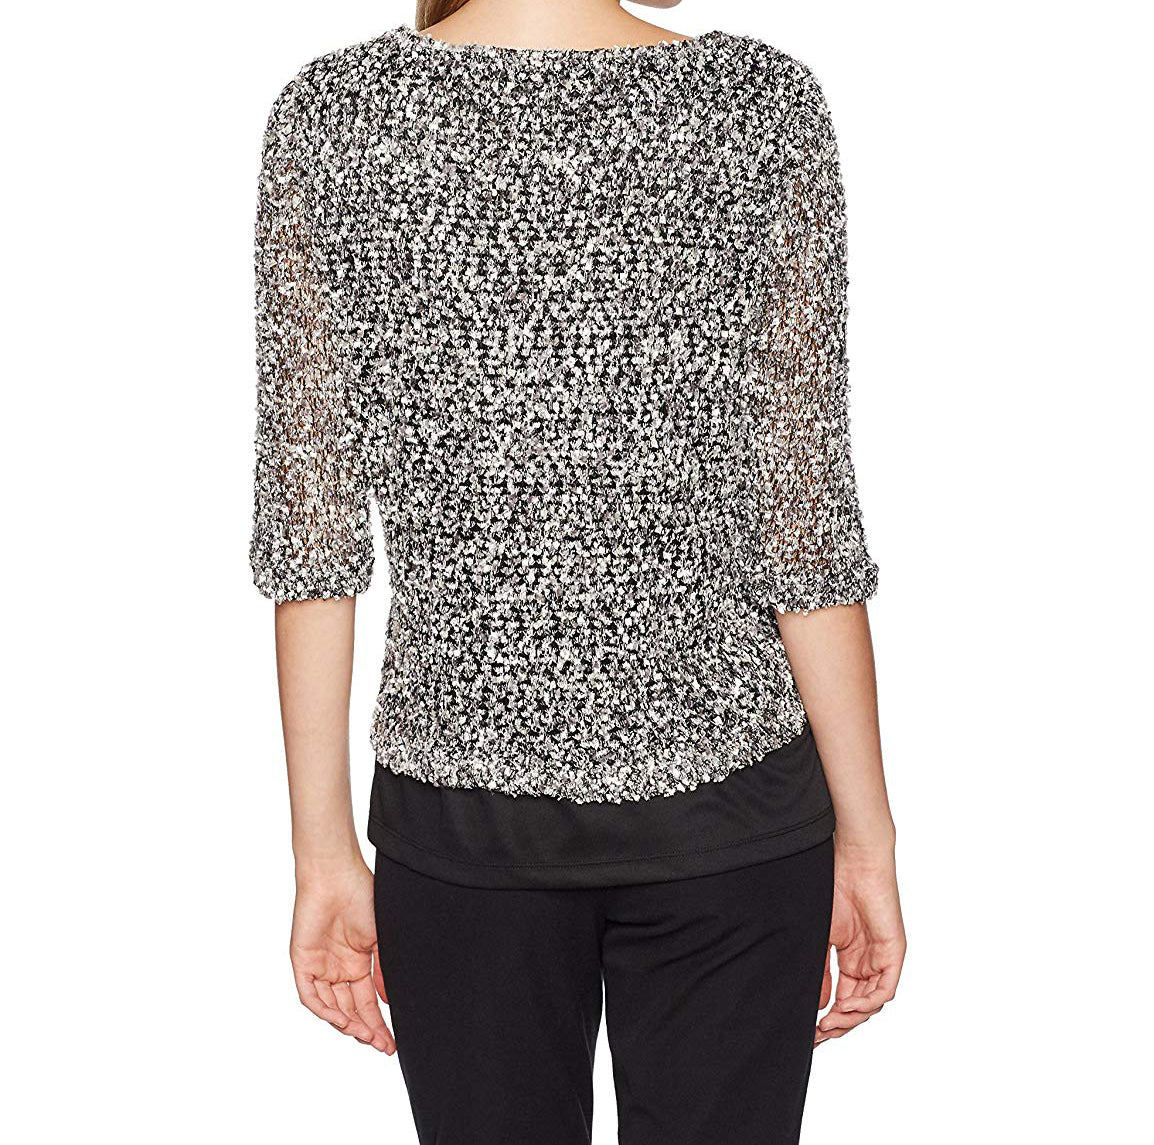 Alfred Dunner Womens Closet Case Collection Textured Top